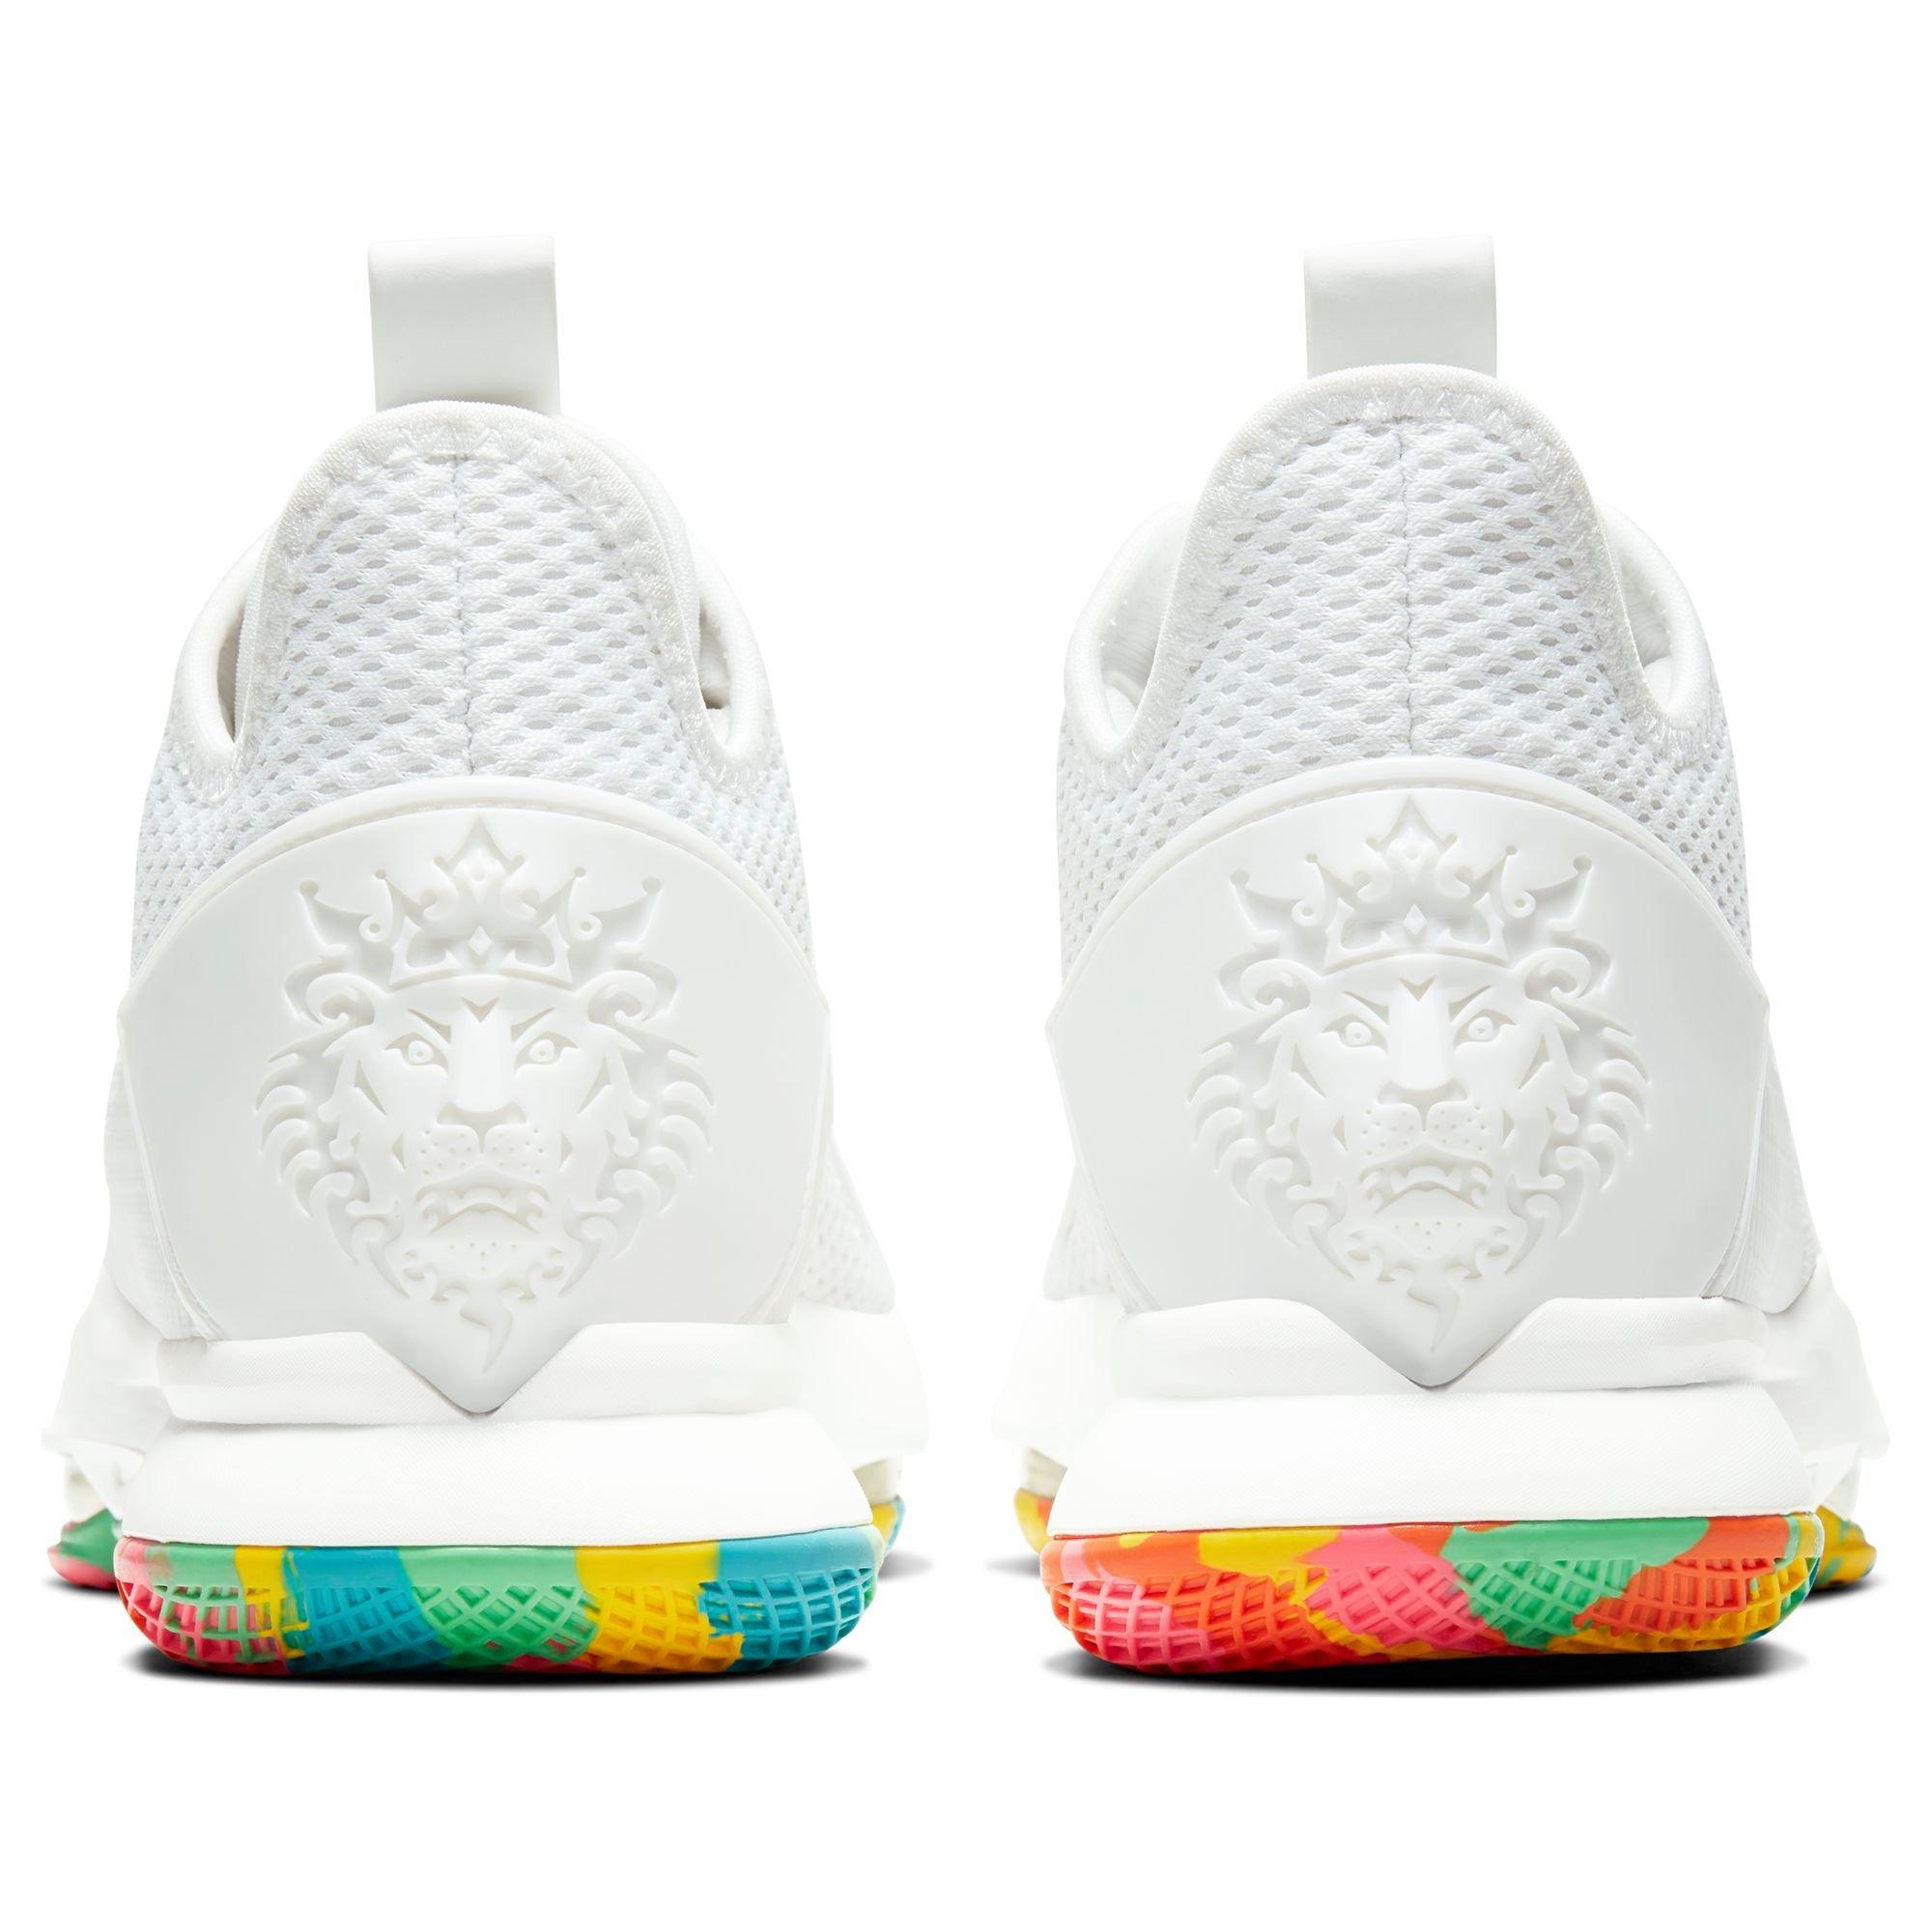 nike lebron witness 4 cereal